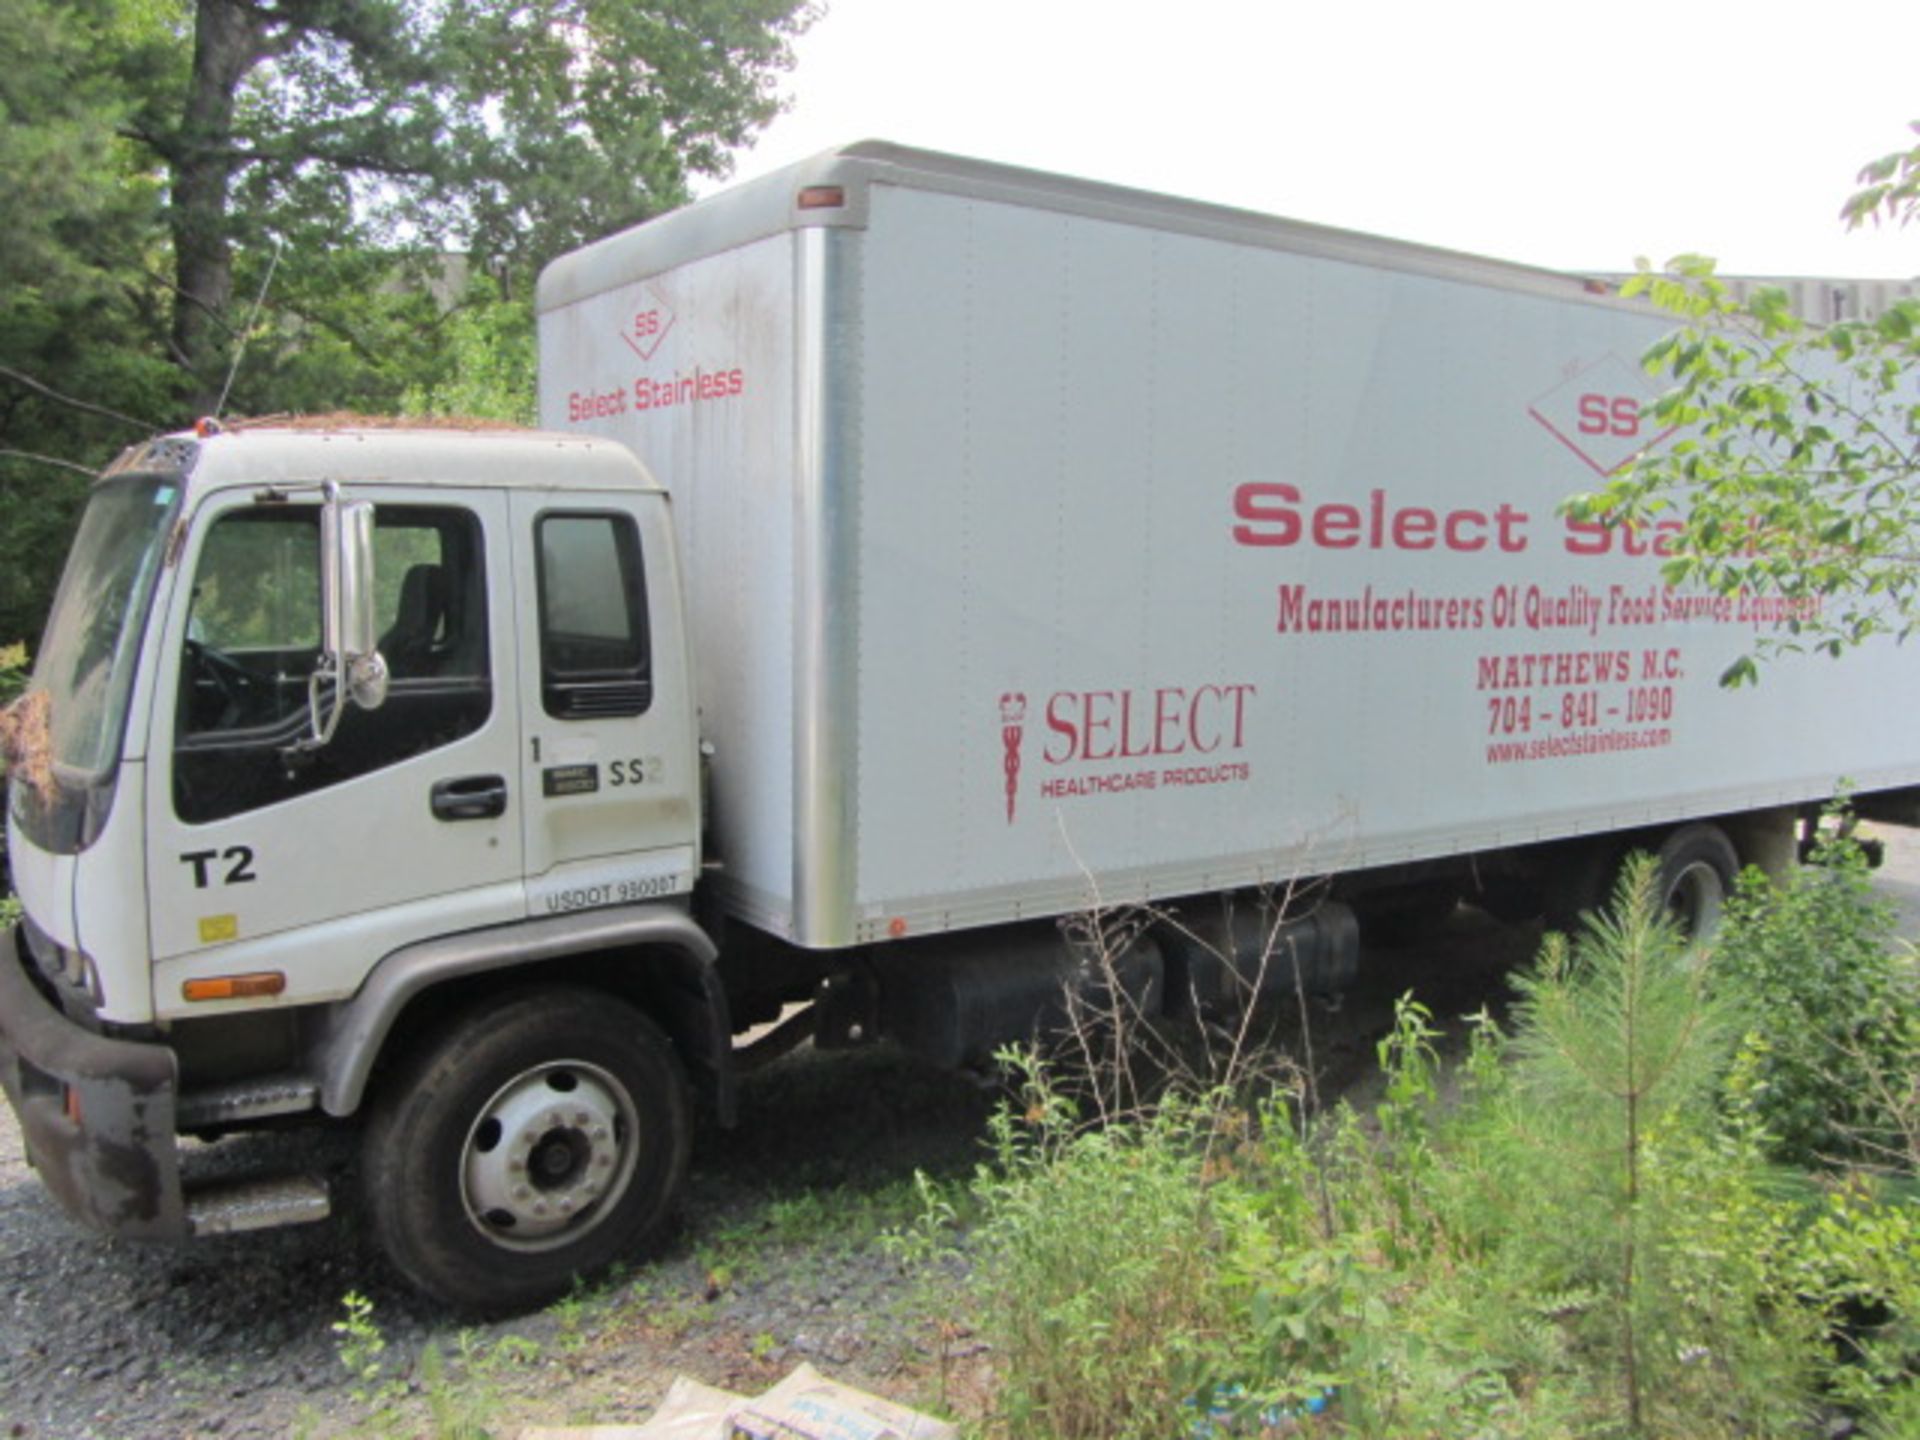 GMC T6500 Diesel Box Truck with 25' Box with Automatic Lift Gate, Dual Rear Wheels, Standard